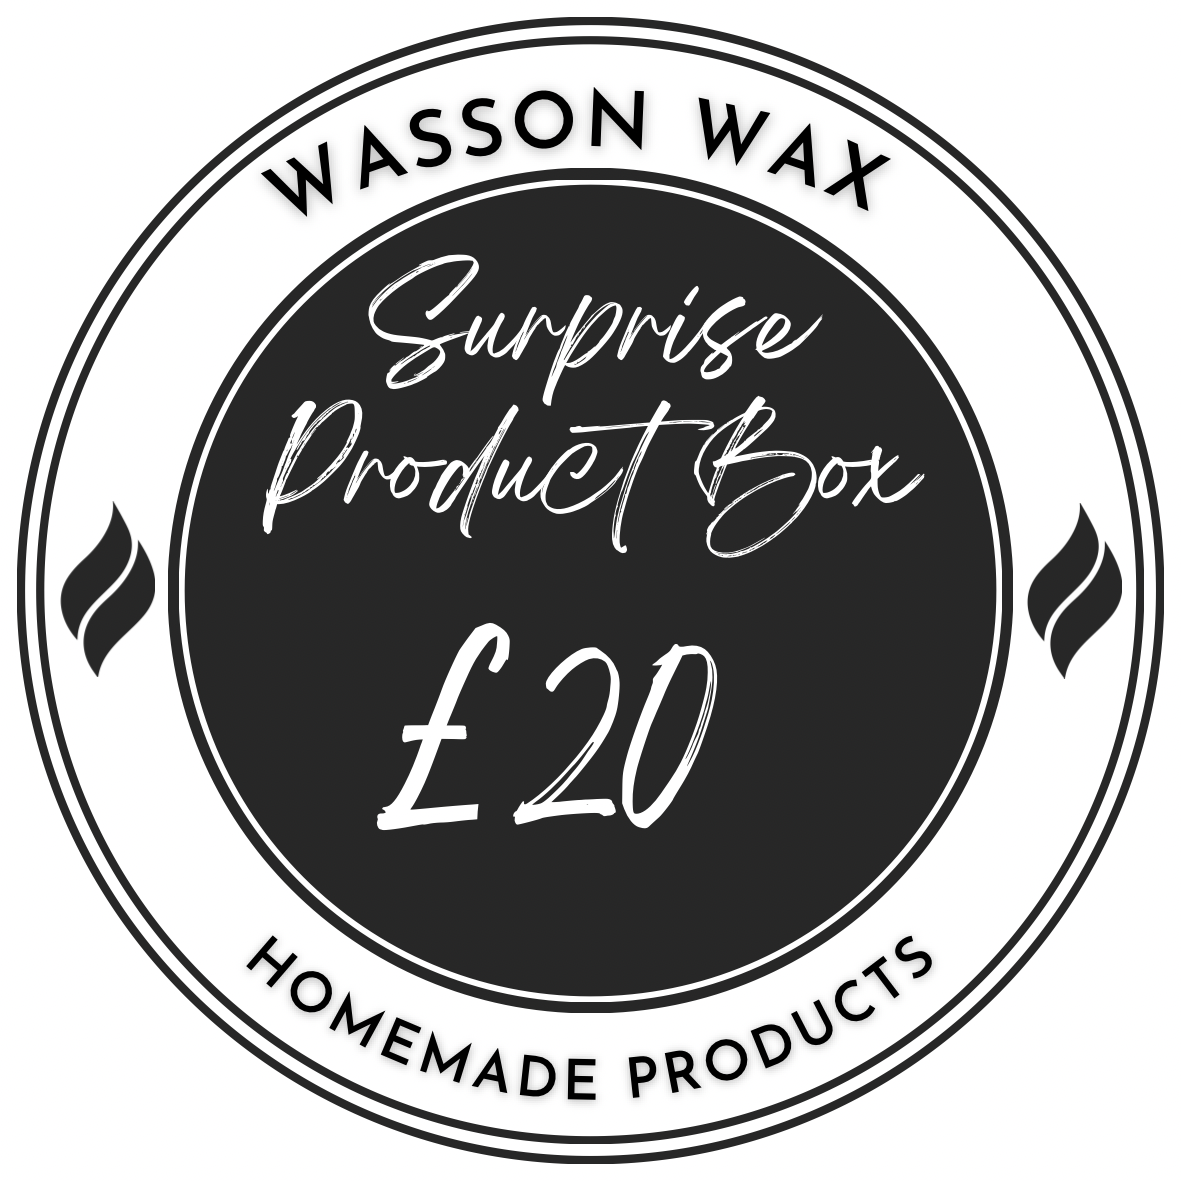 Surprise Product Box Wasson Wax